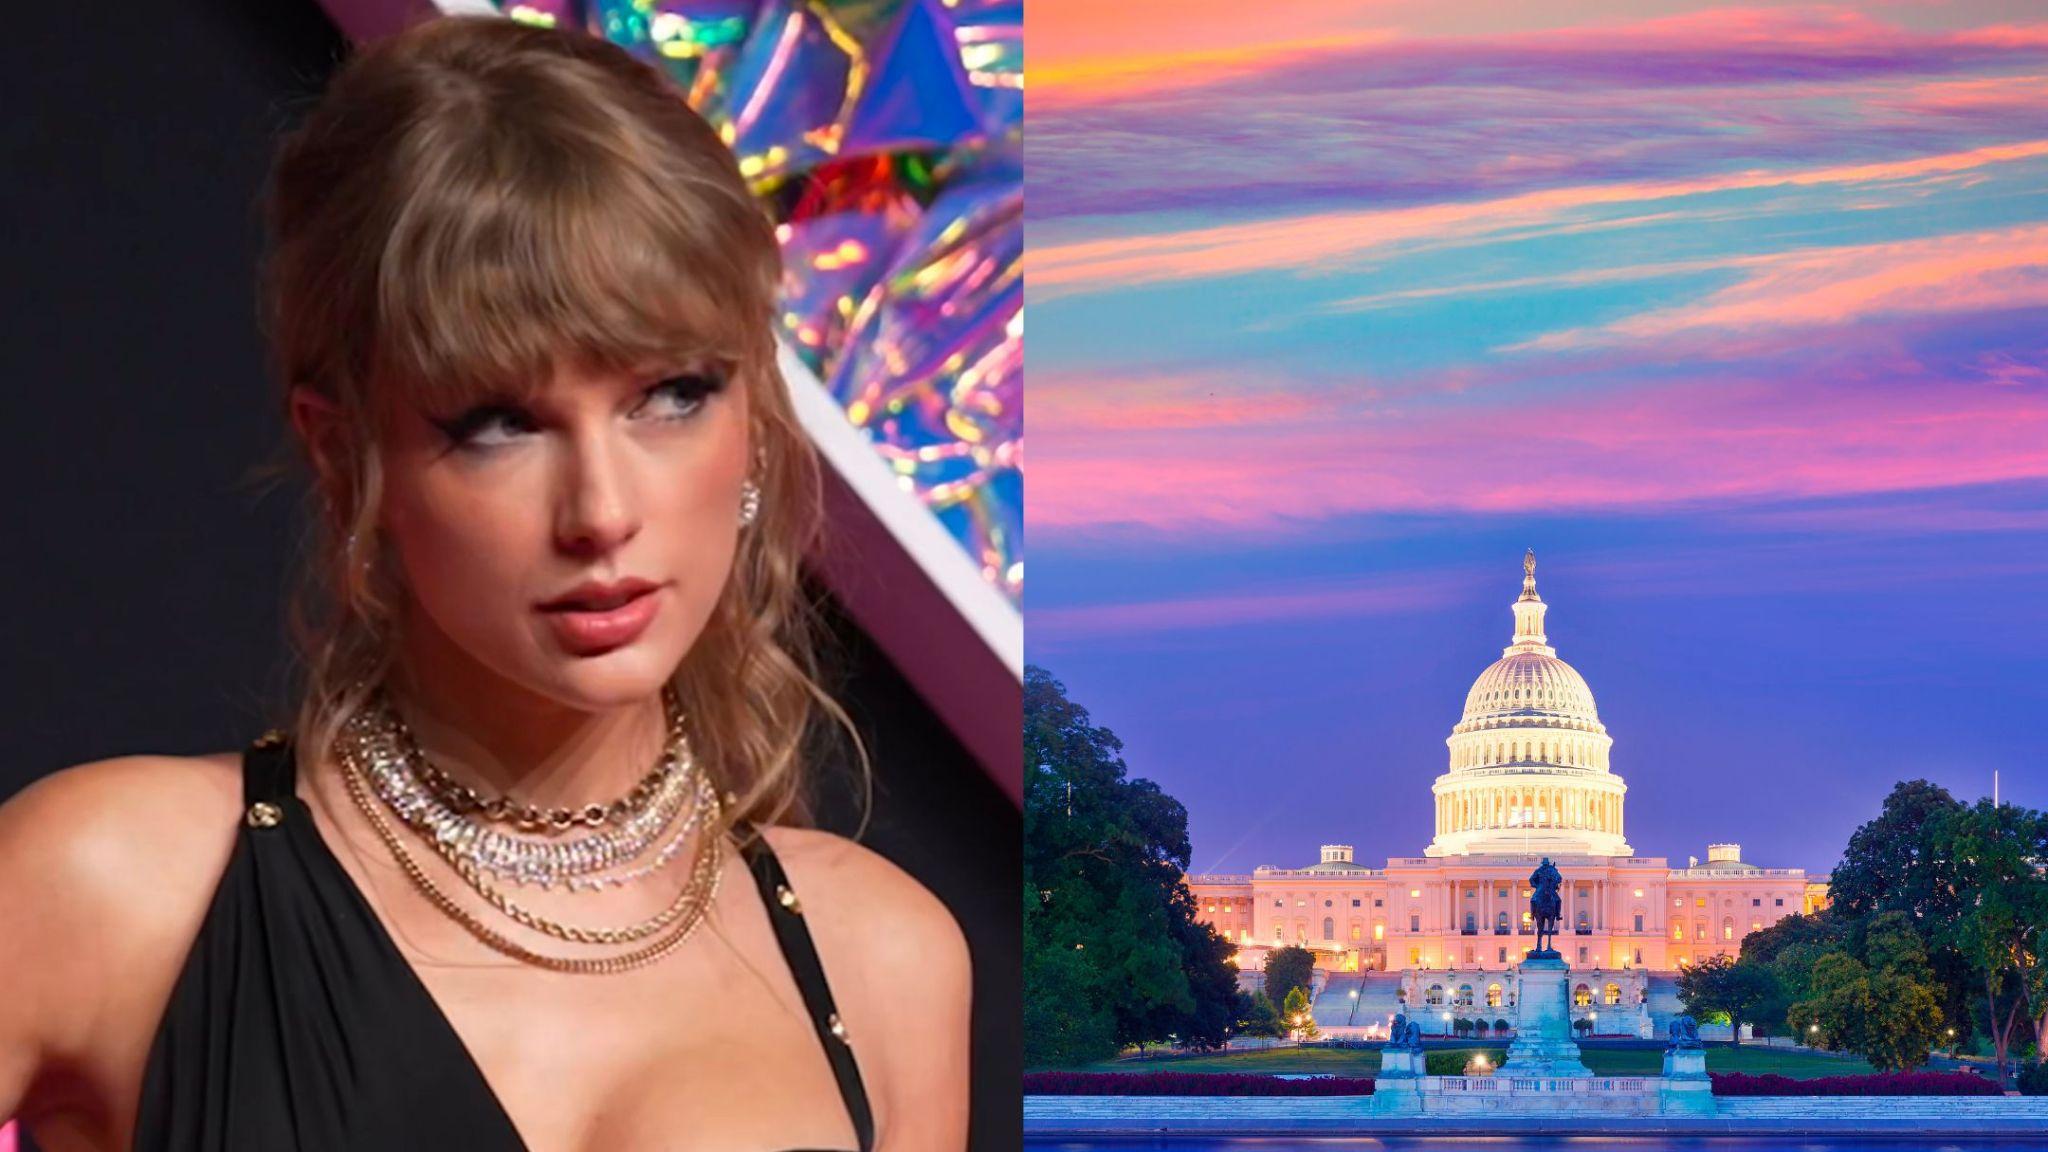 Taylor Swift (left) shown next to Capitol Hill (right).